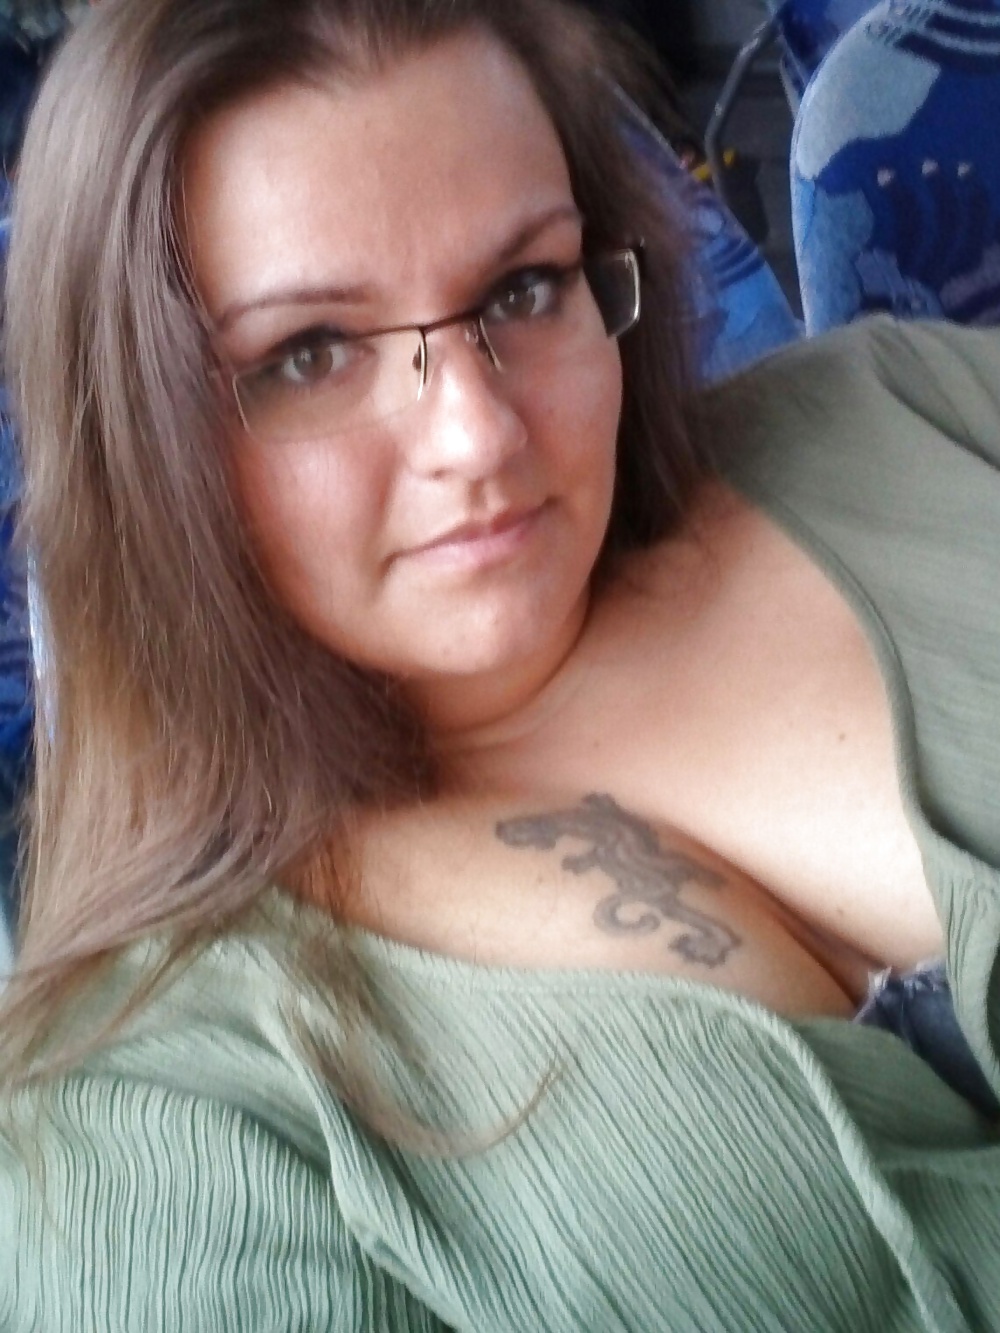 On the bus #33361833